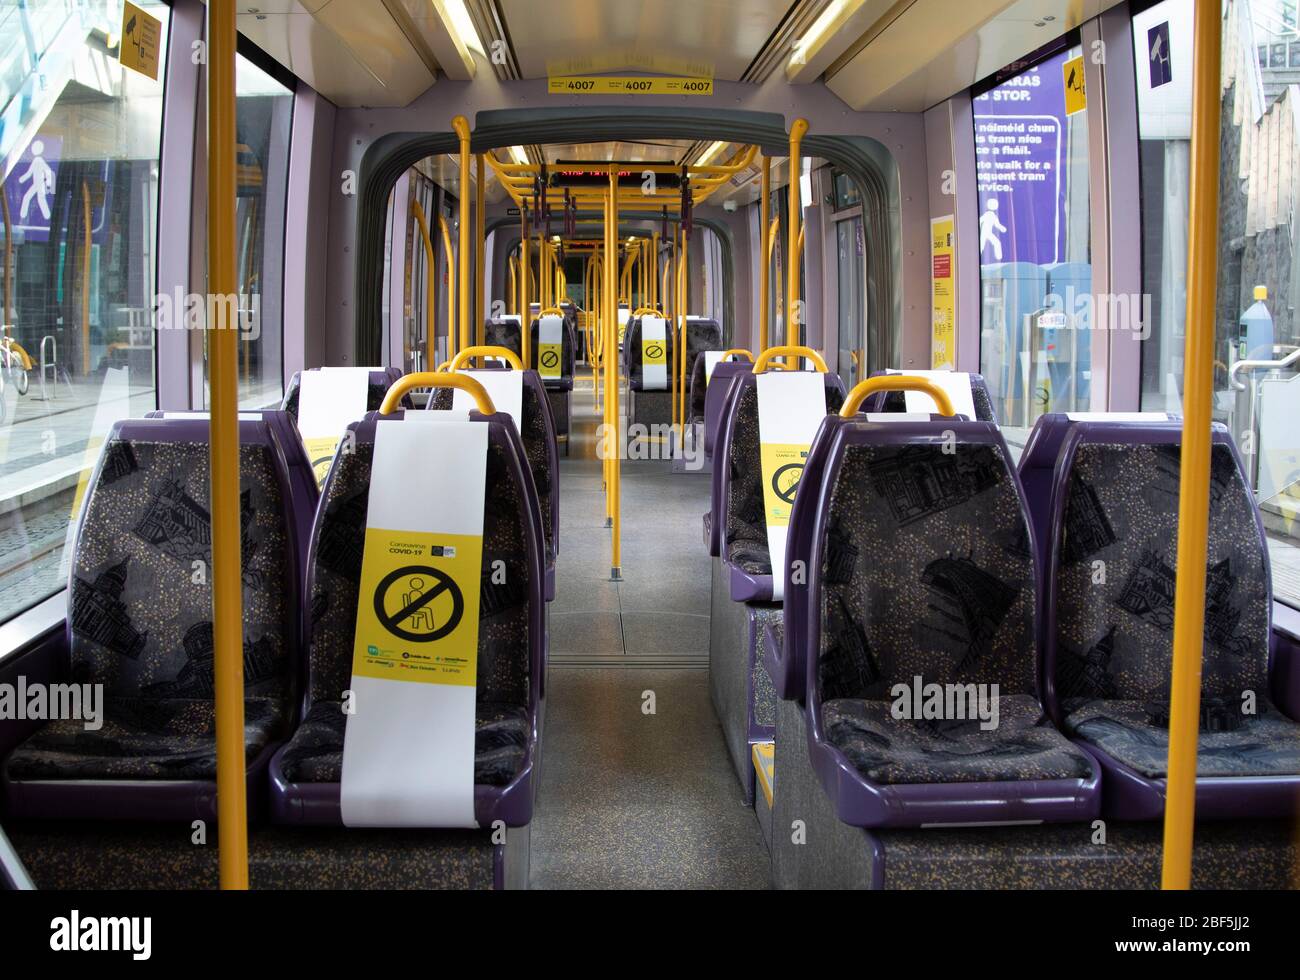 Dublin, Ireland - April 6, 2020: public health social distancing notices on a Luas tram during Covid-19 restrictions. Stock Photo